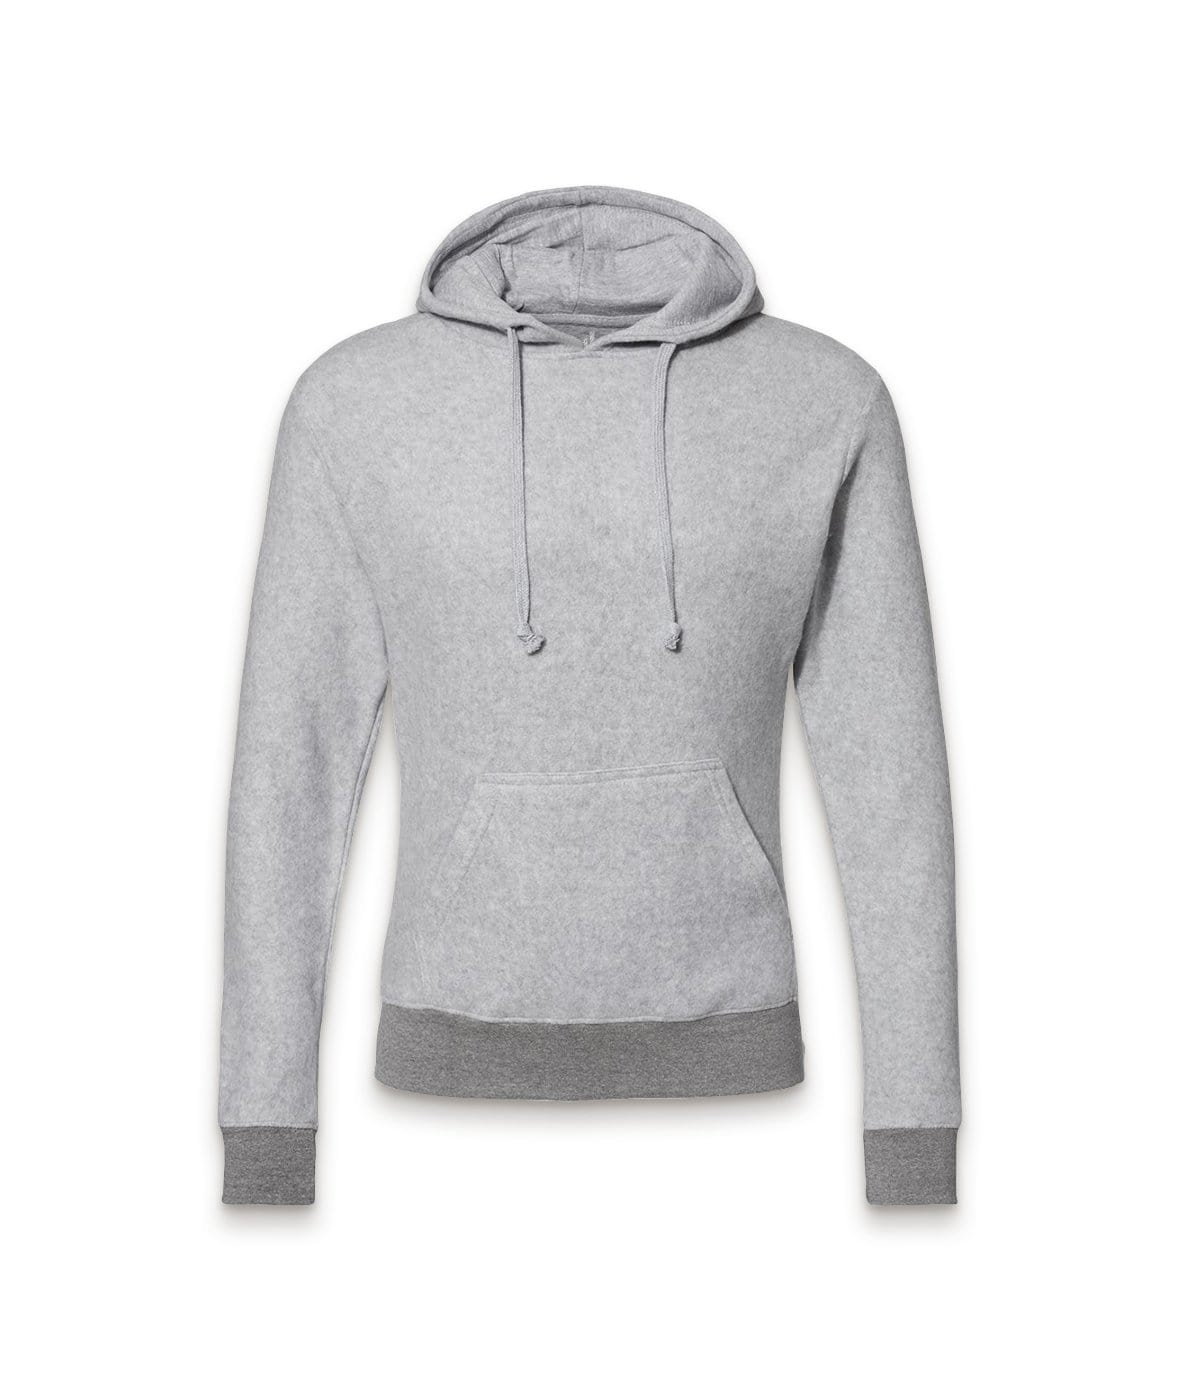 Nayked Apparel Men Men's Ridiculously Soft Inside Out Hoodie